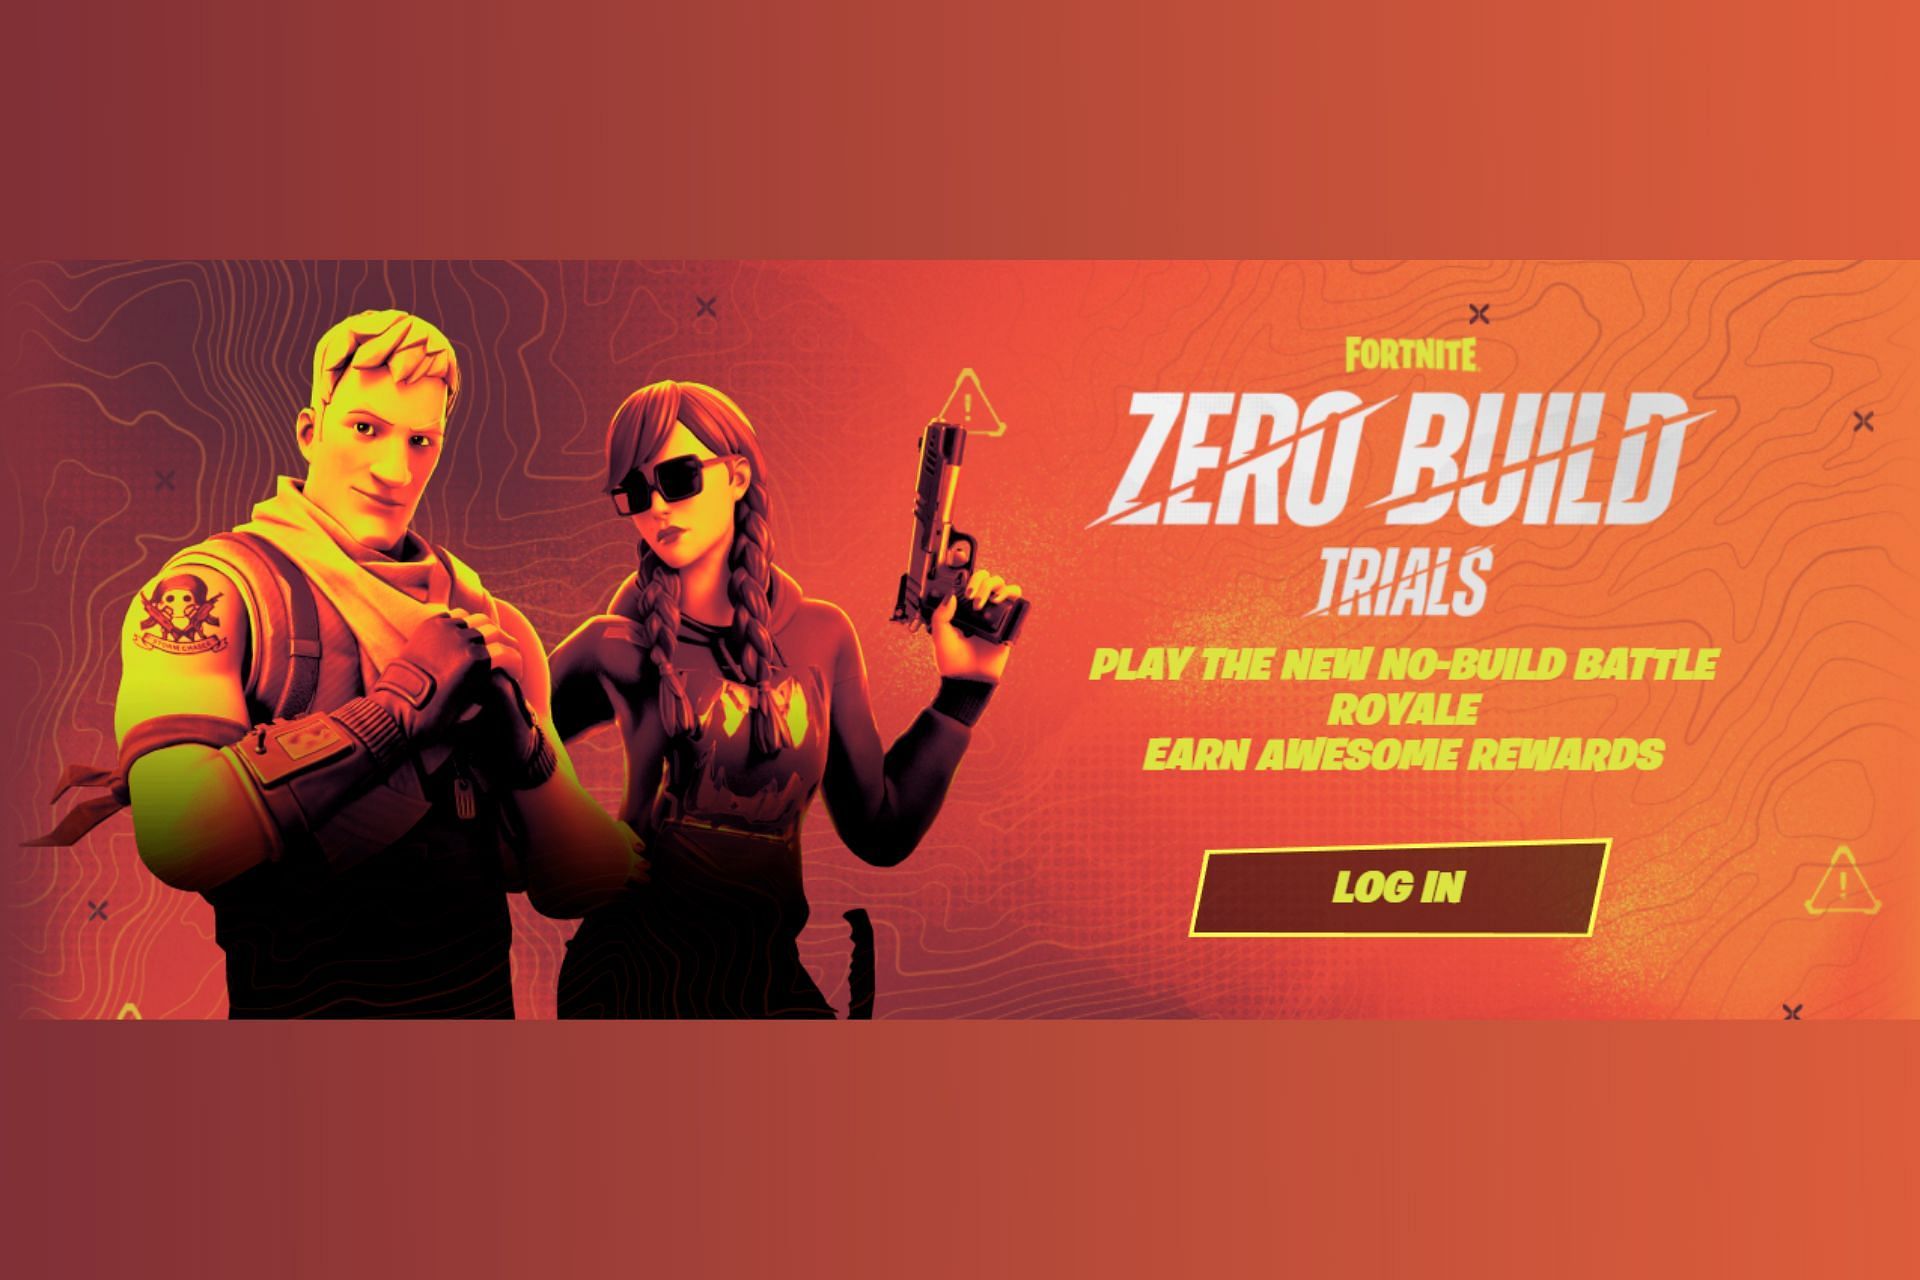 How to get free rewards from Fortnite Zero Build Trials